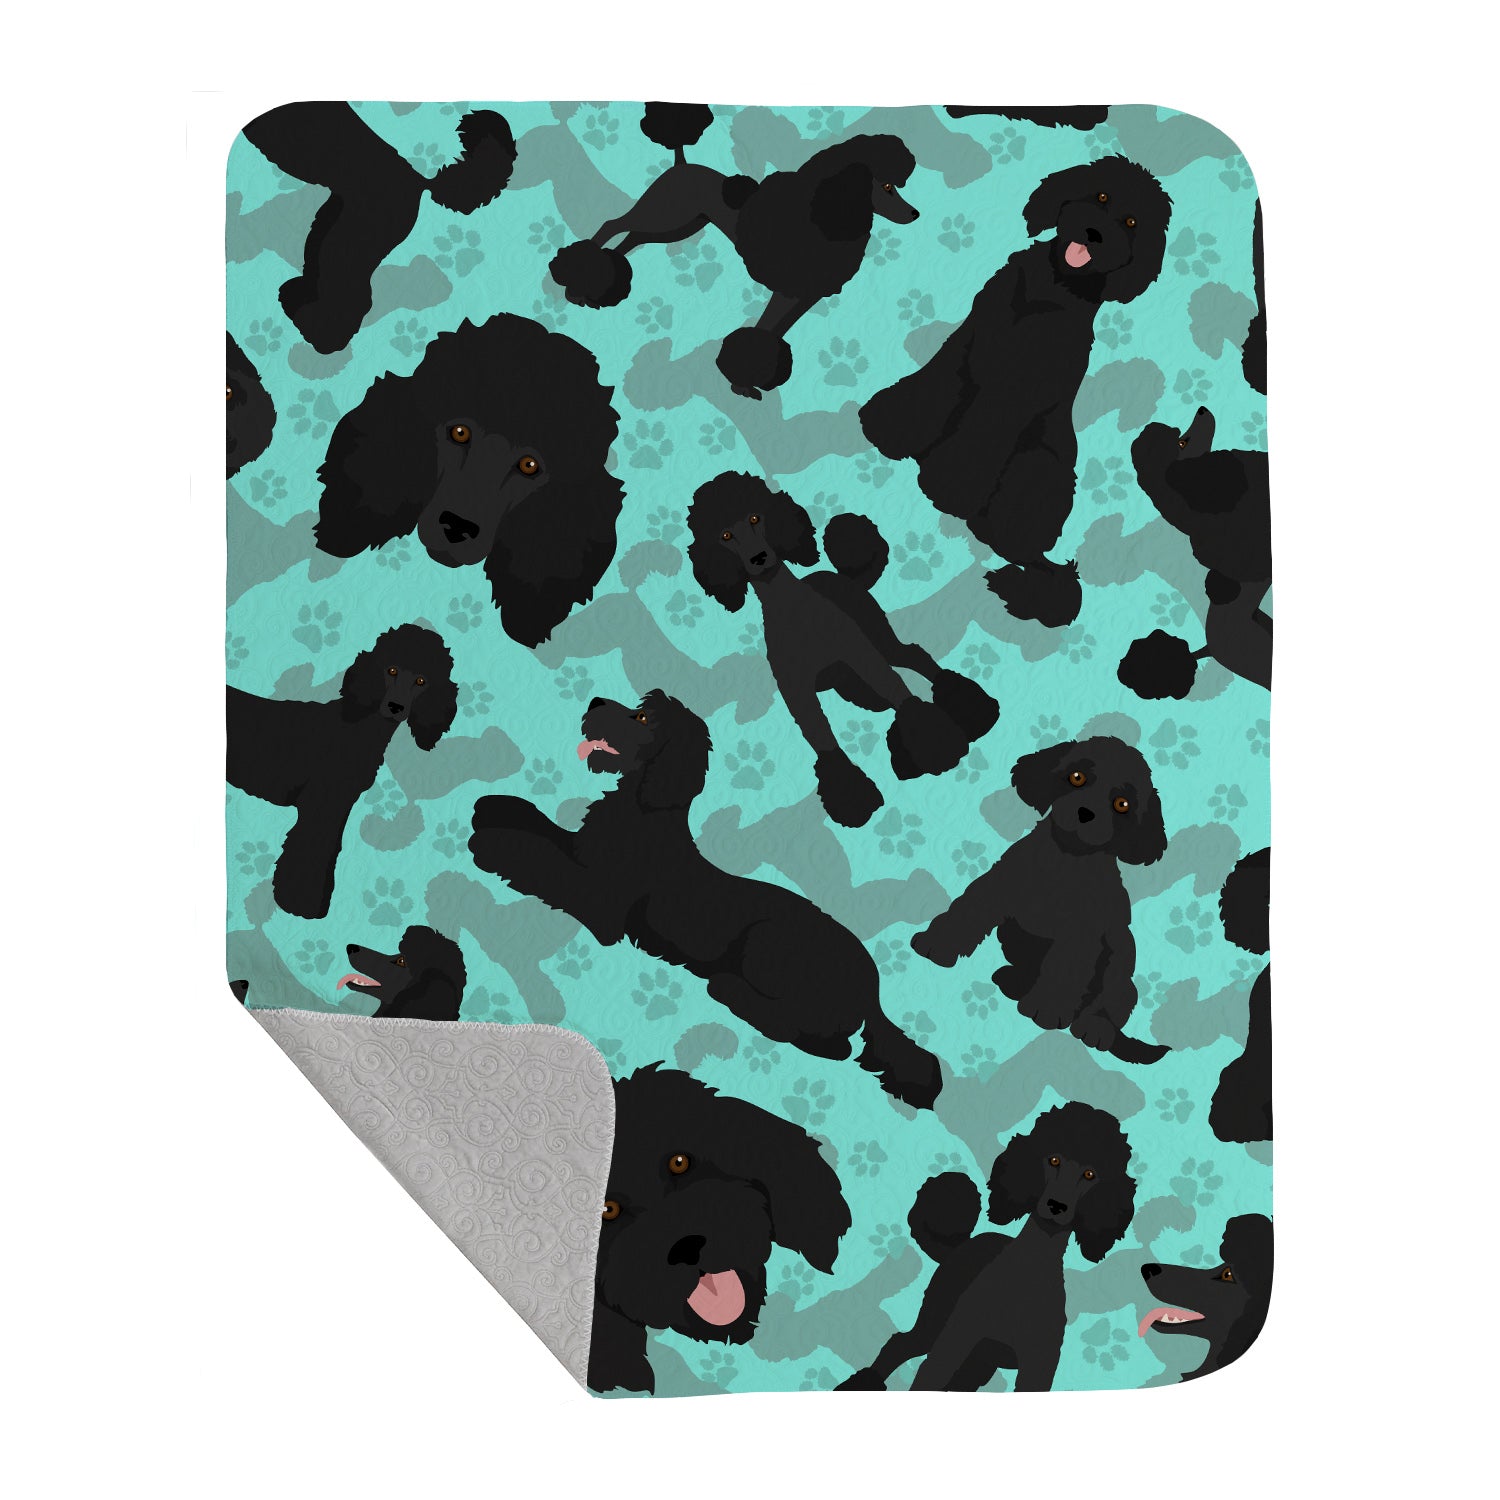 Buy this Black Standard Poodle Quilted Blanket 50x60